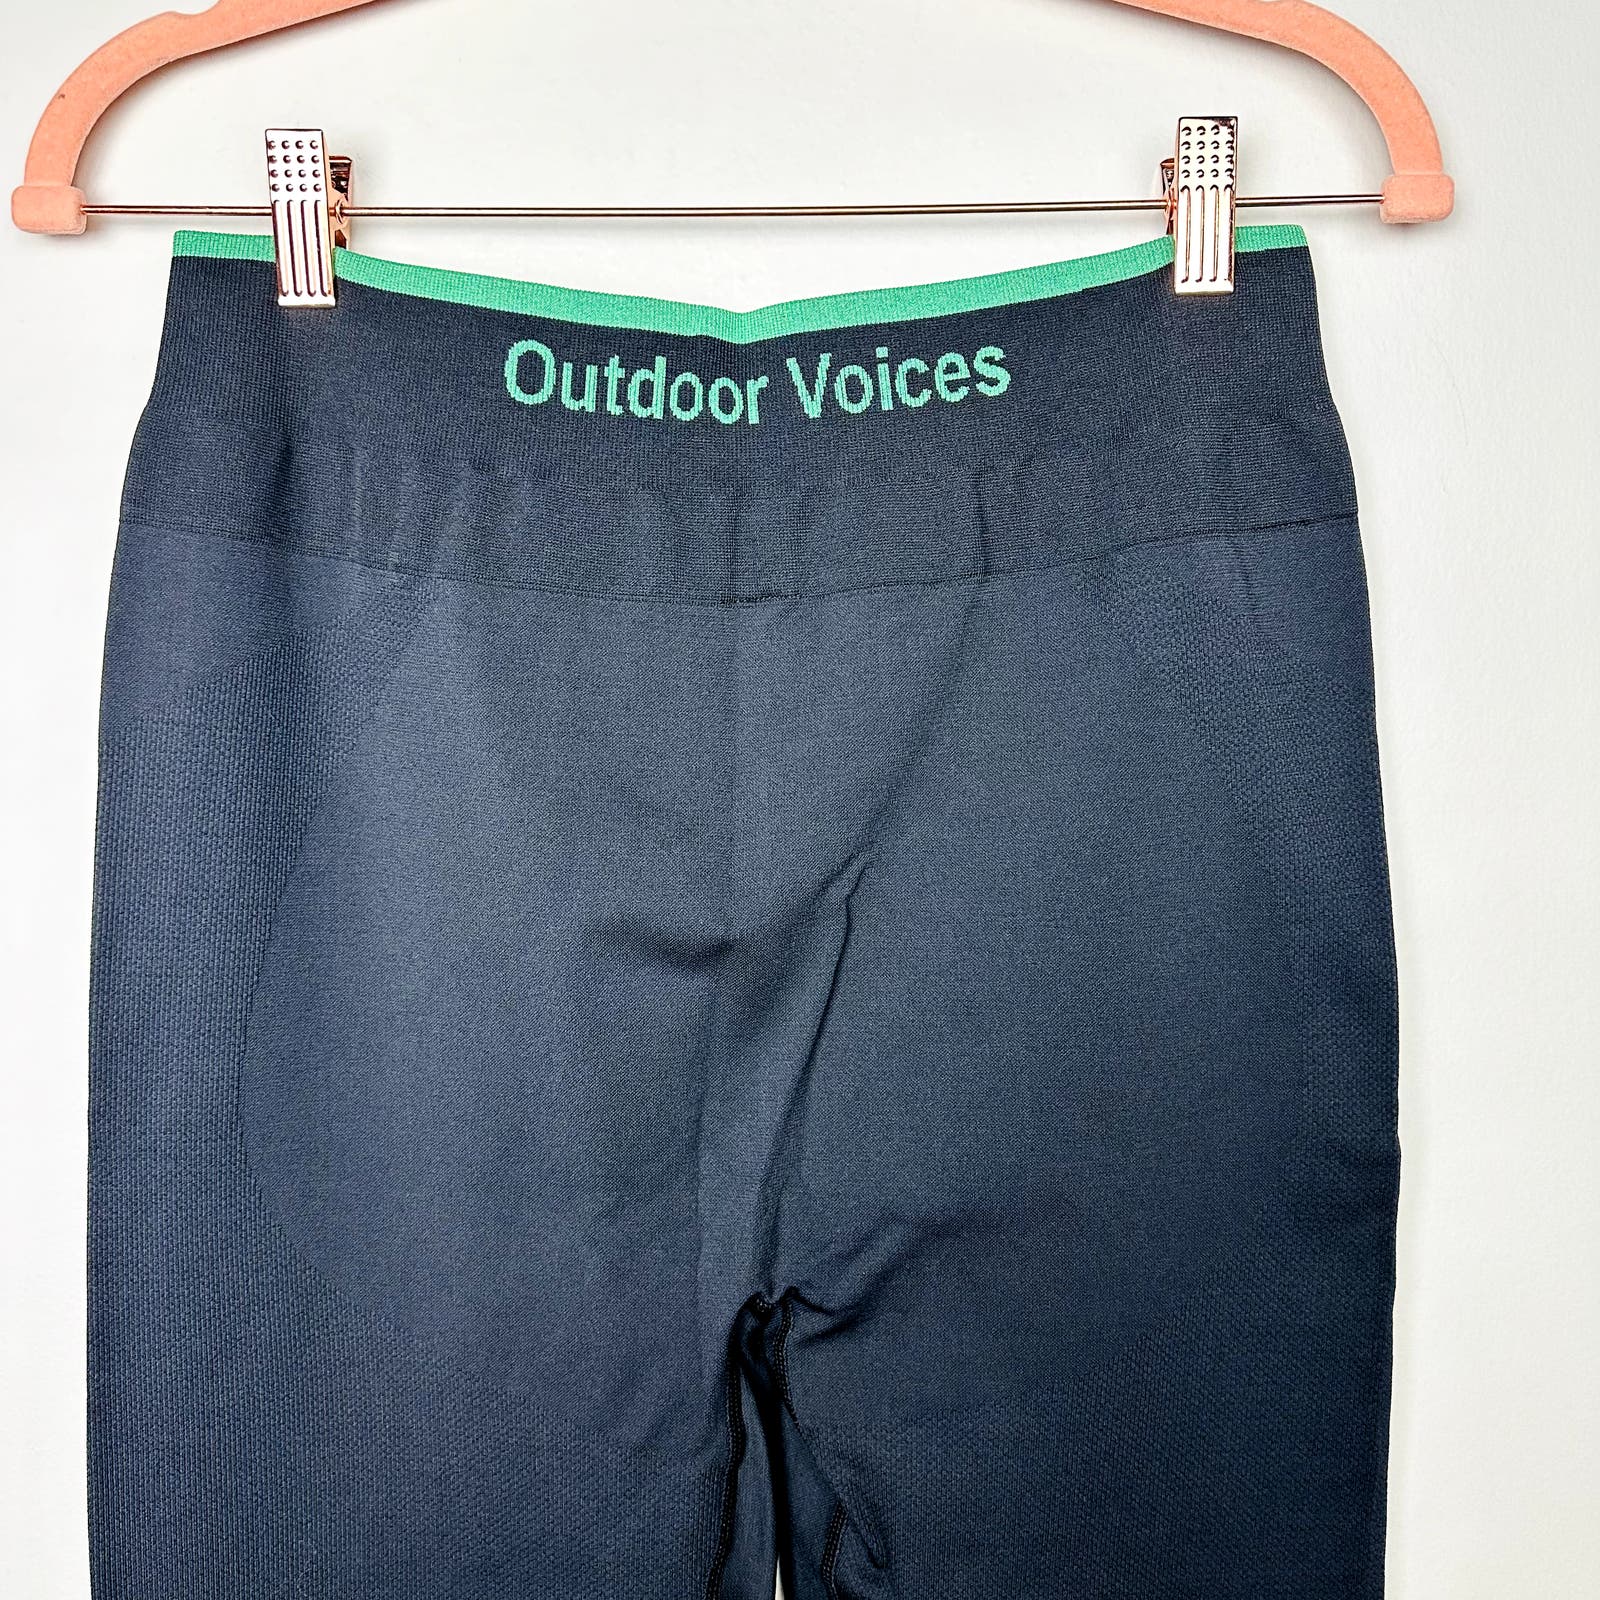 Outdoor Voices NWT Black SeamlessRib Tight Size Large